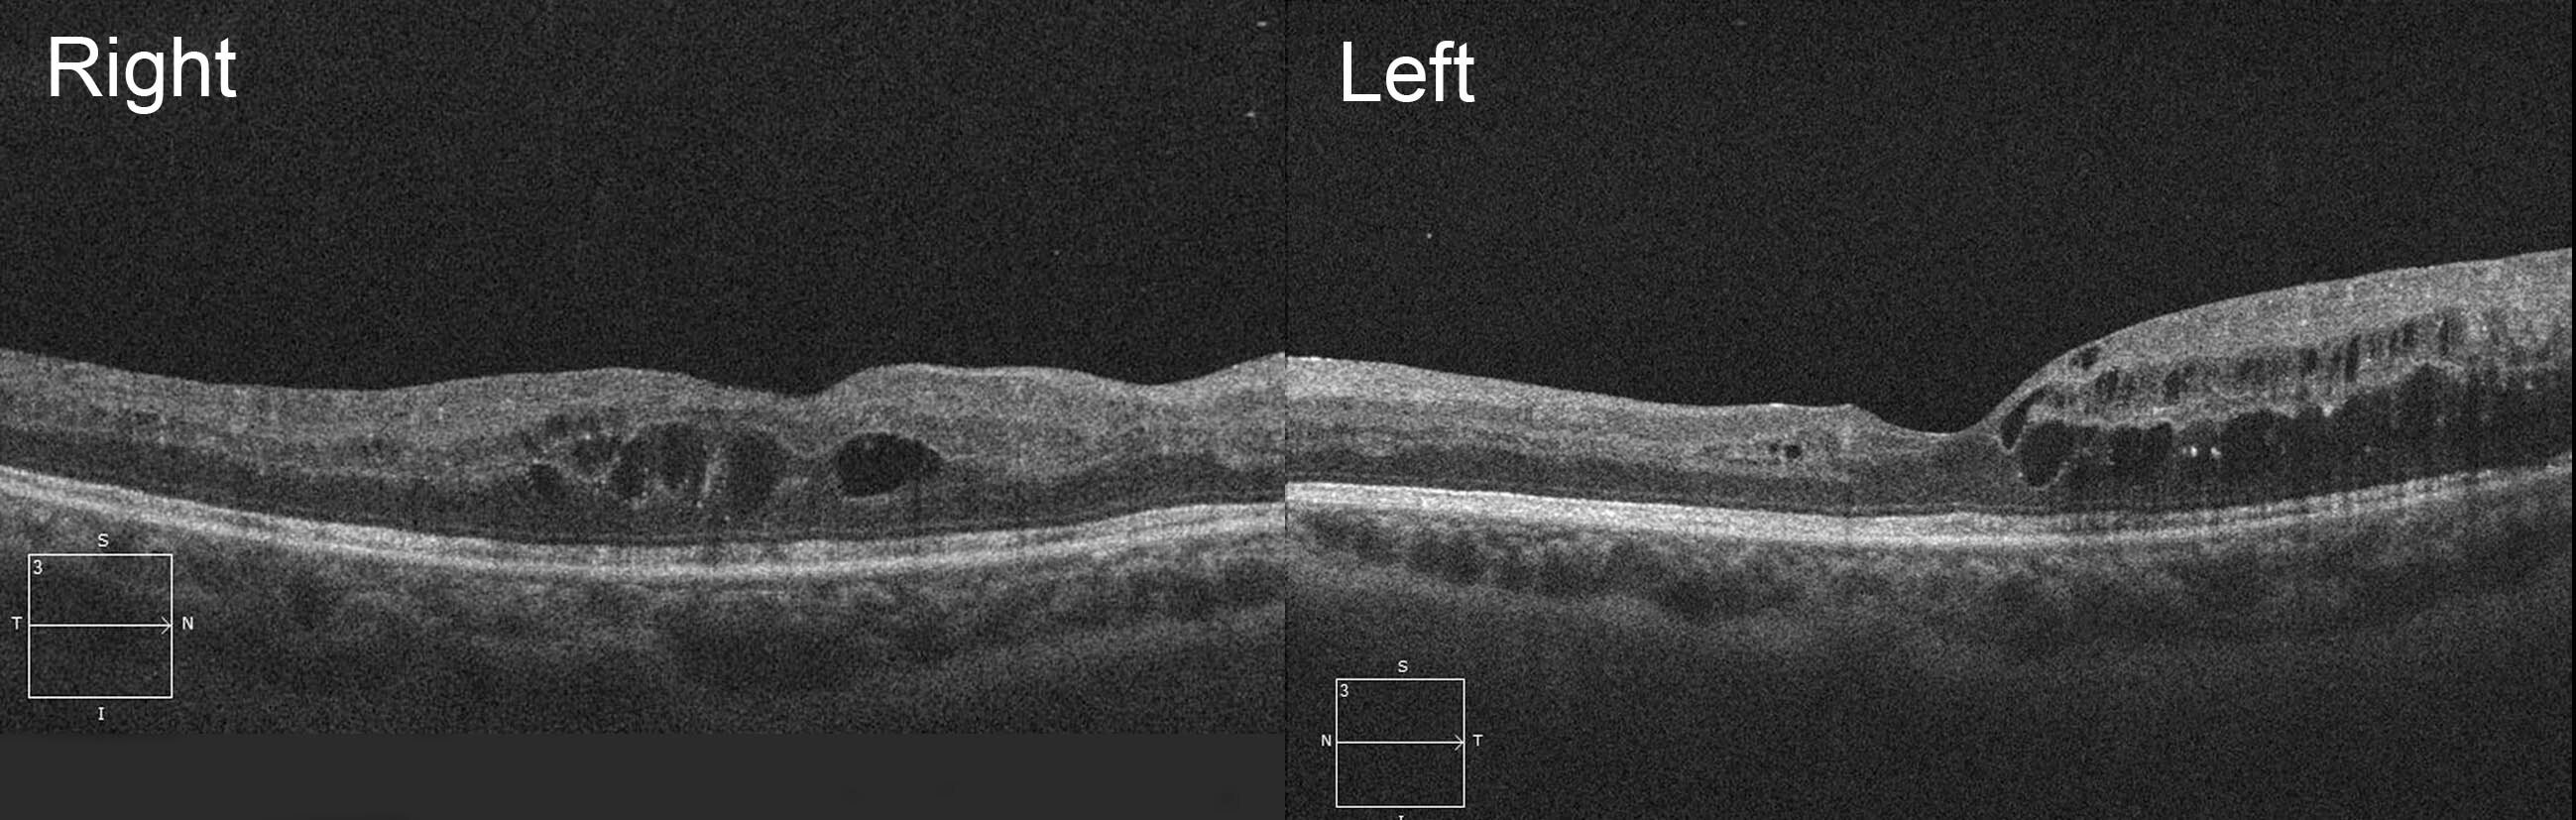 Optical coherence tomography scans show cystic oedema at the right fovea and temporal to the left fovea.